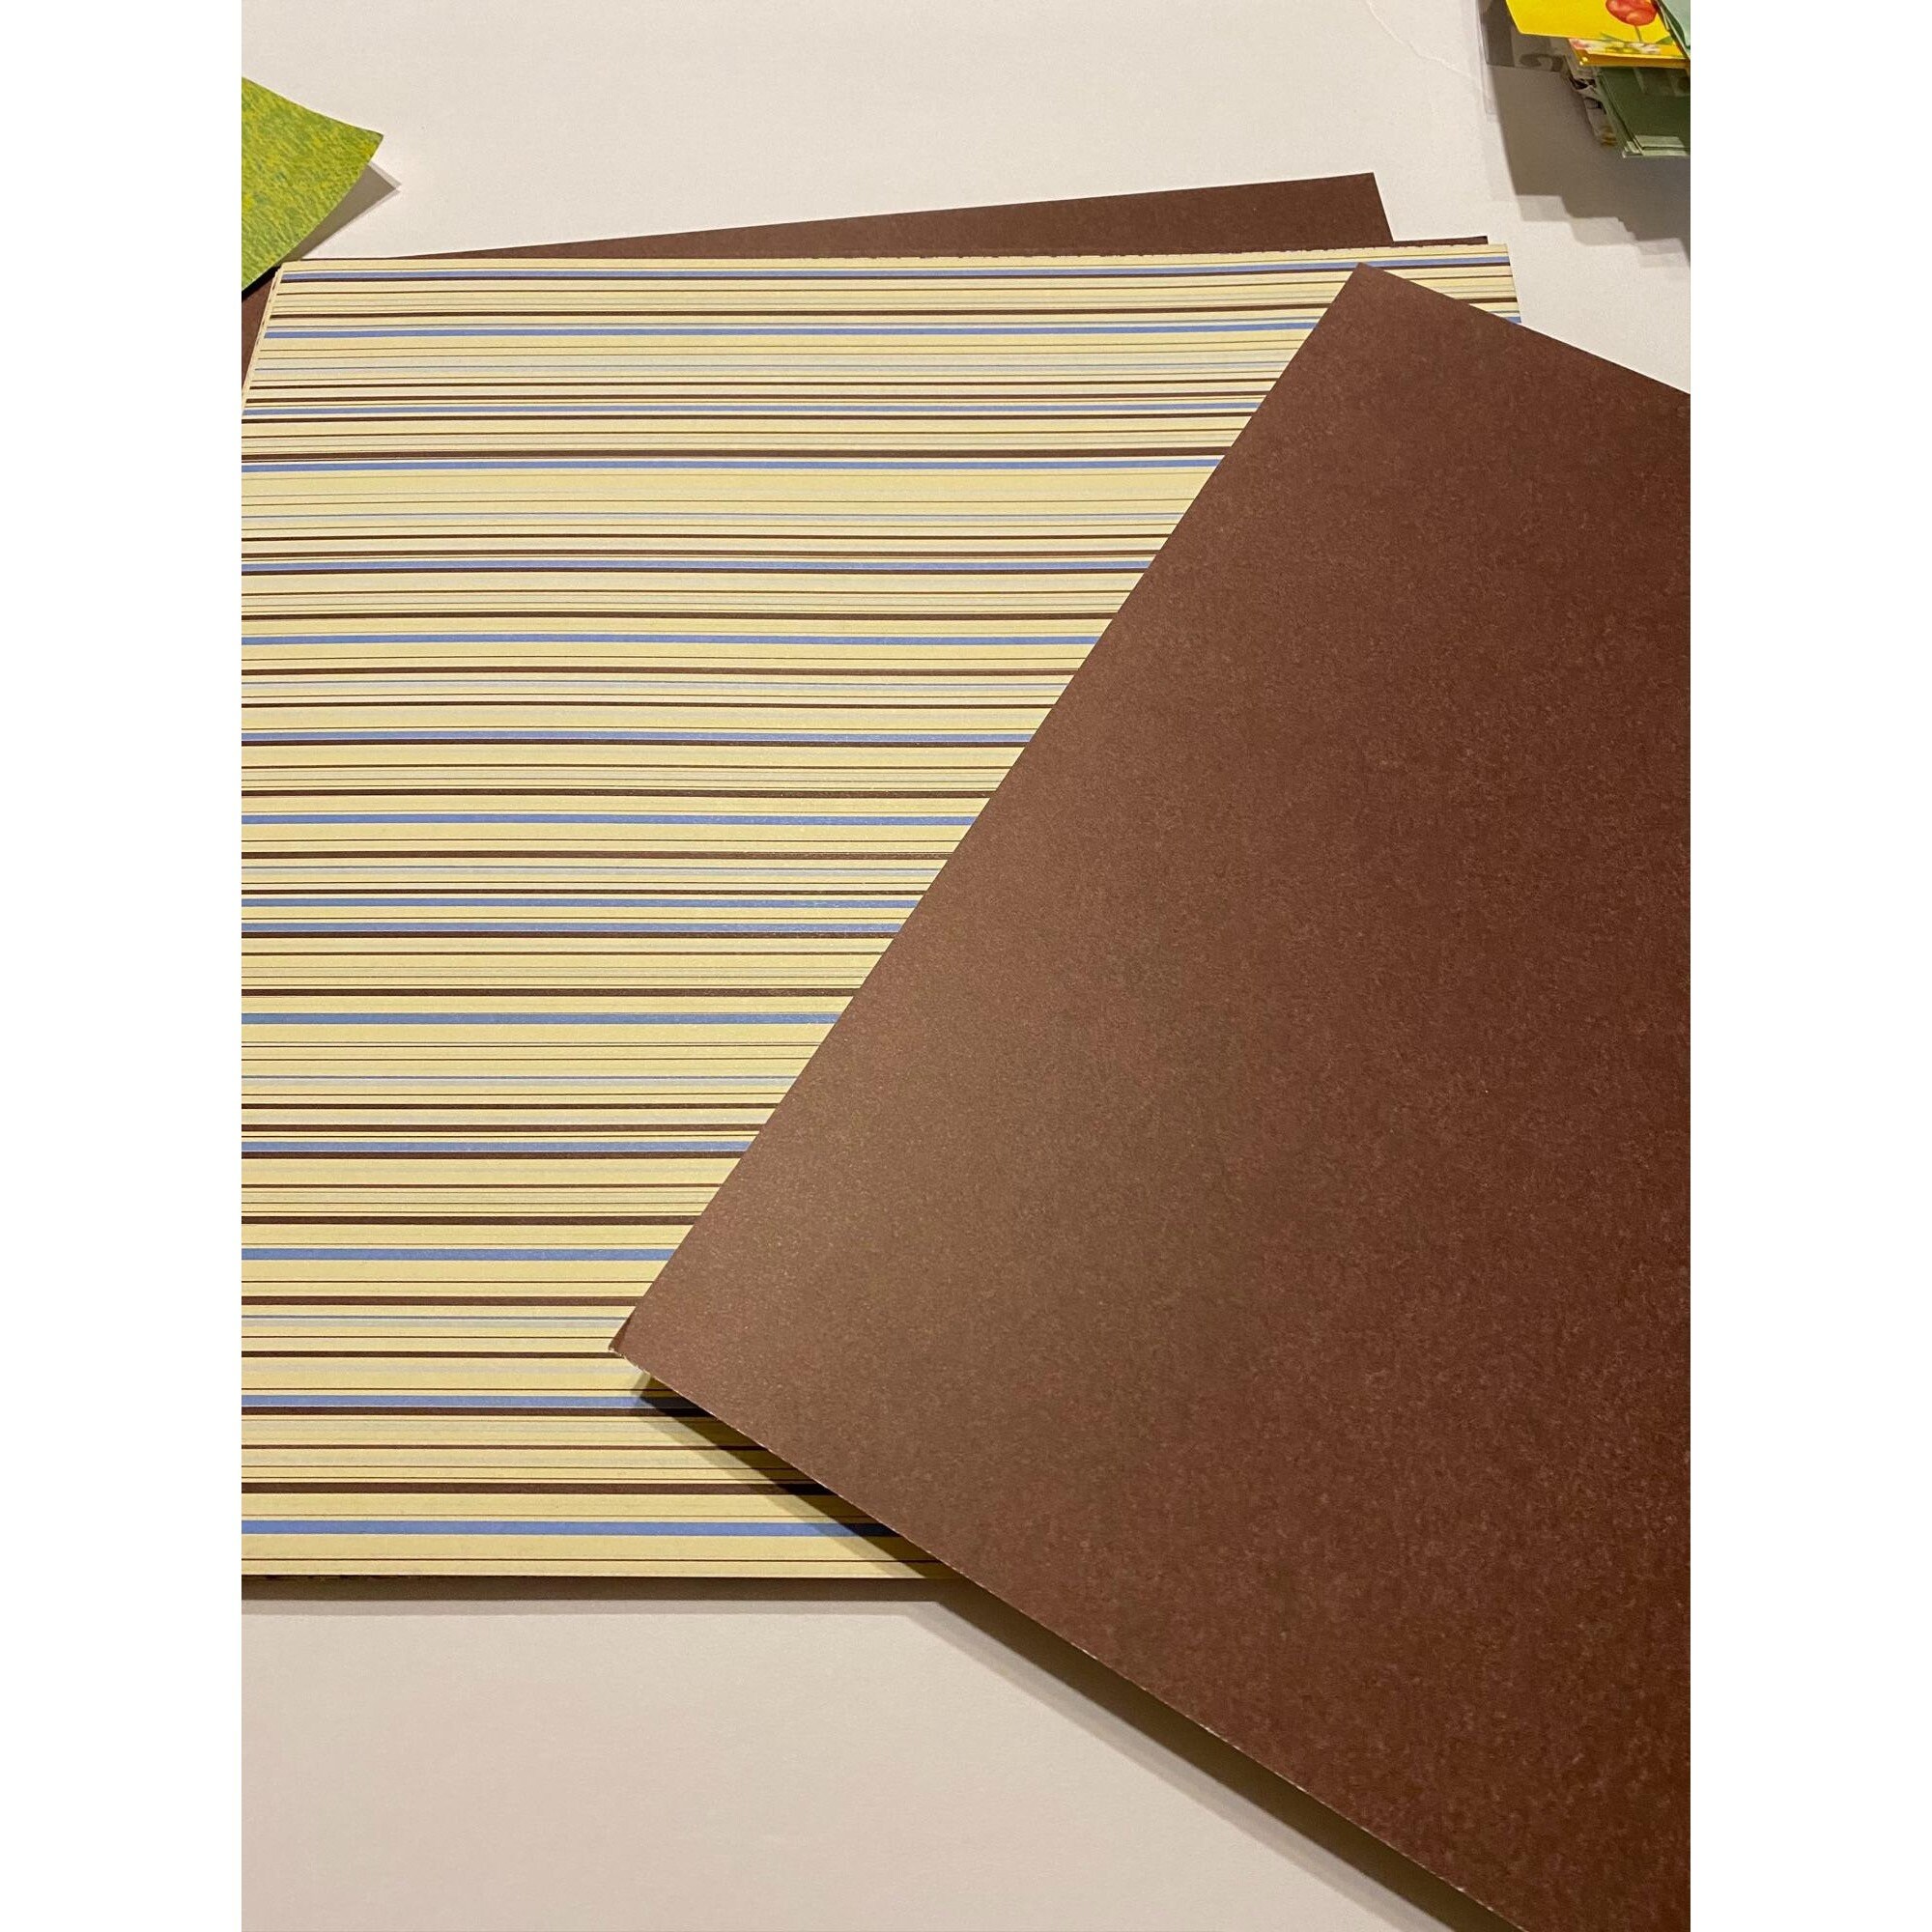 Paperhues Decorative Scrapbook Papers 12x12 Pad, 50 Sheets